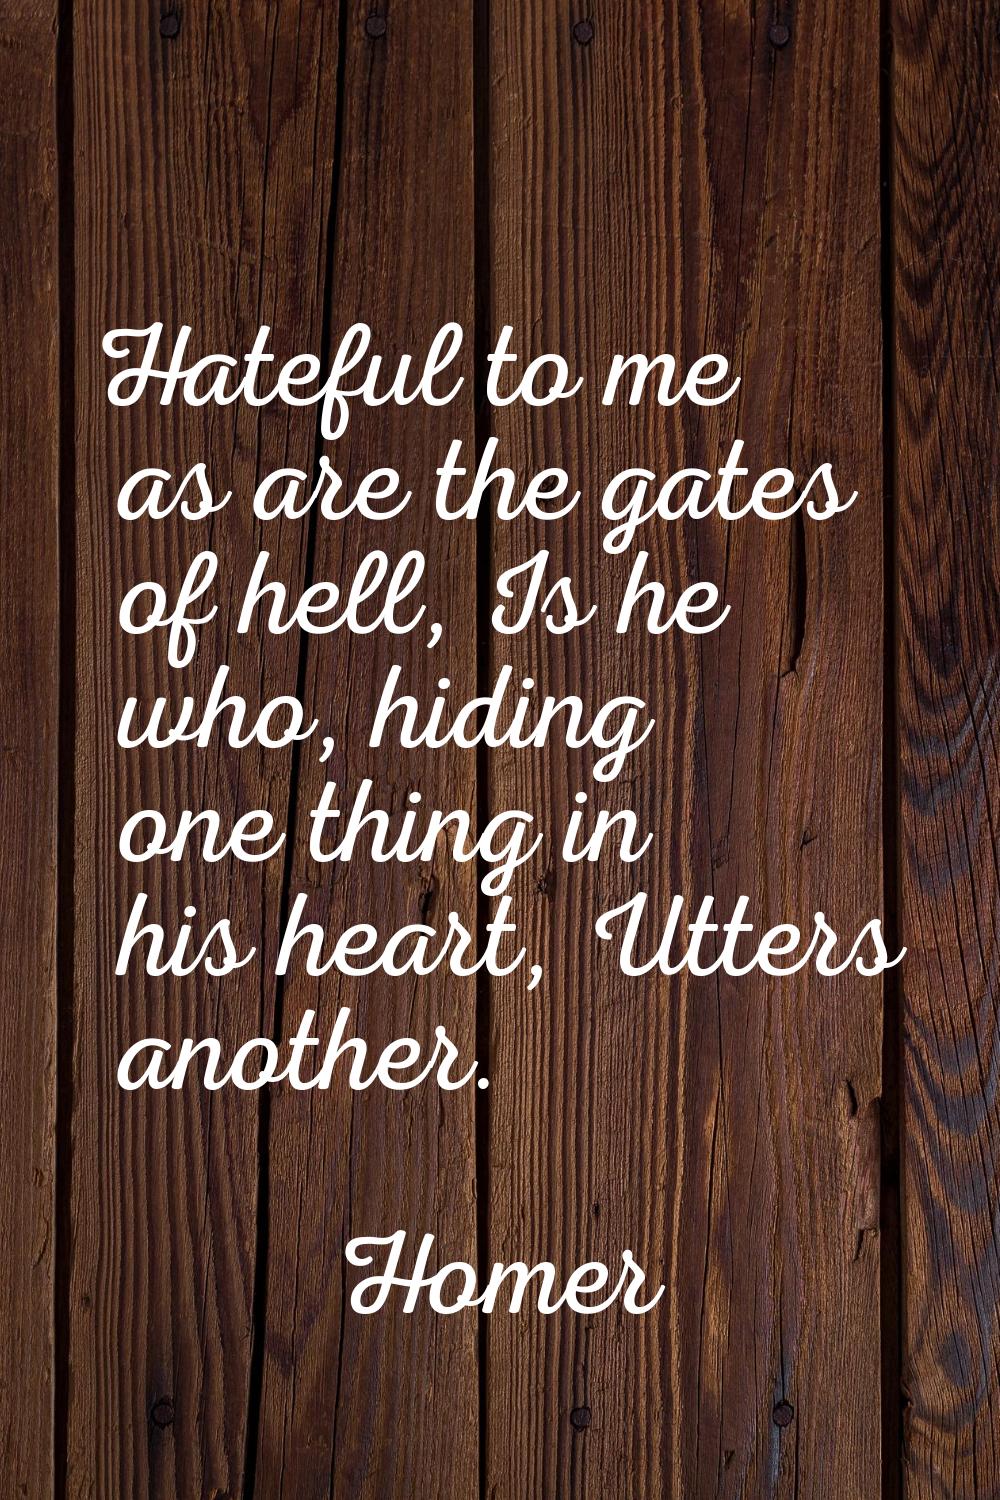 Hateful to me as are the gates of hell, Is he who, hiding one thing in his heart, Utters another.